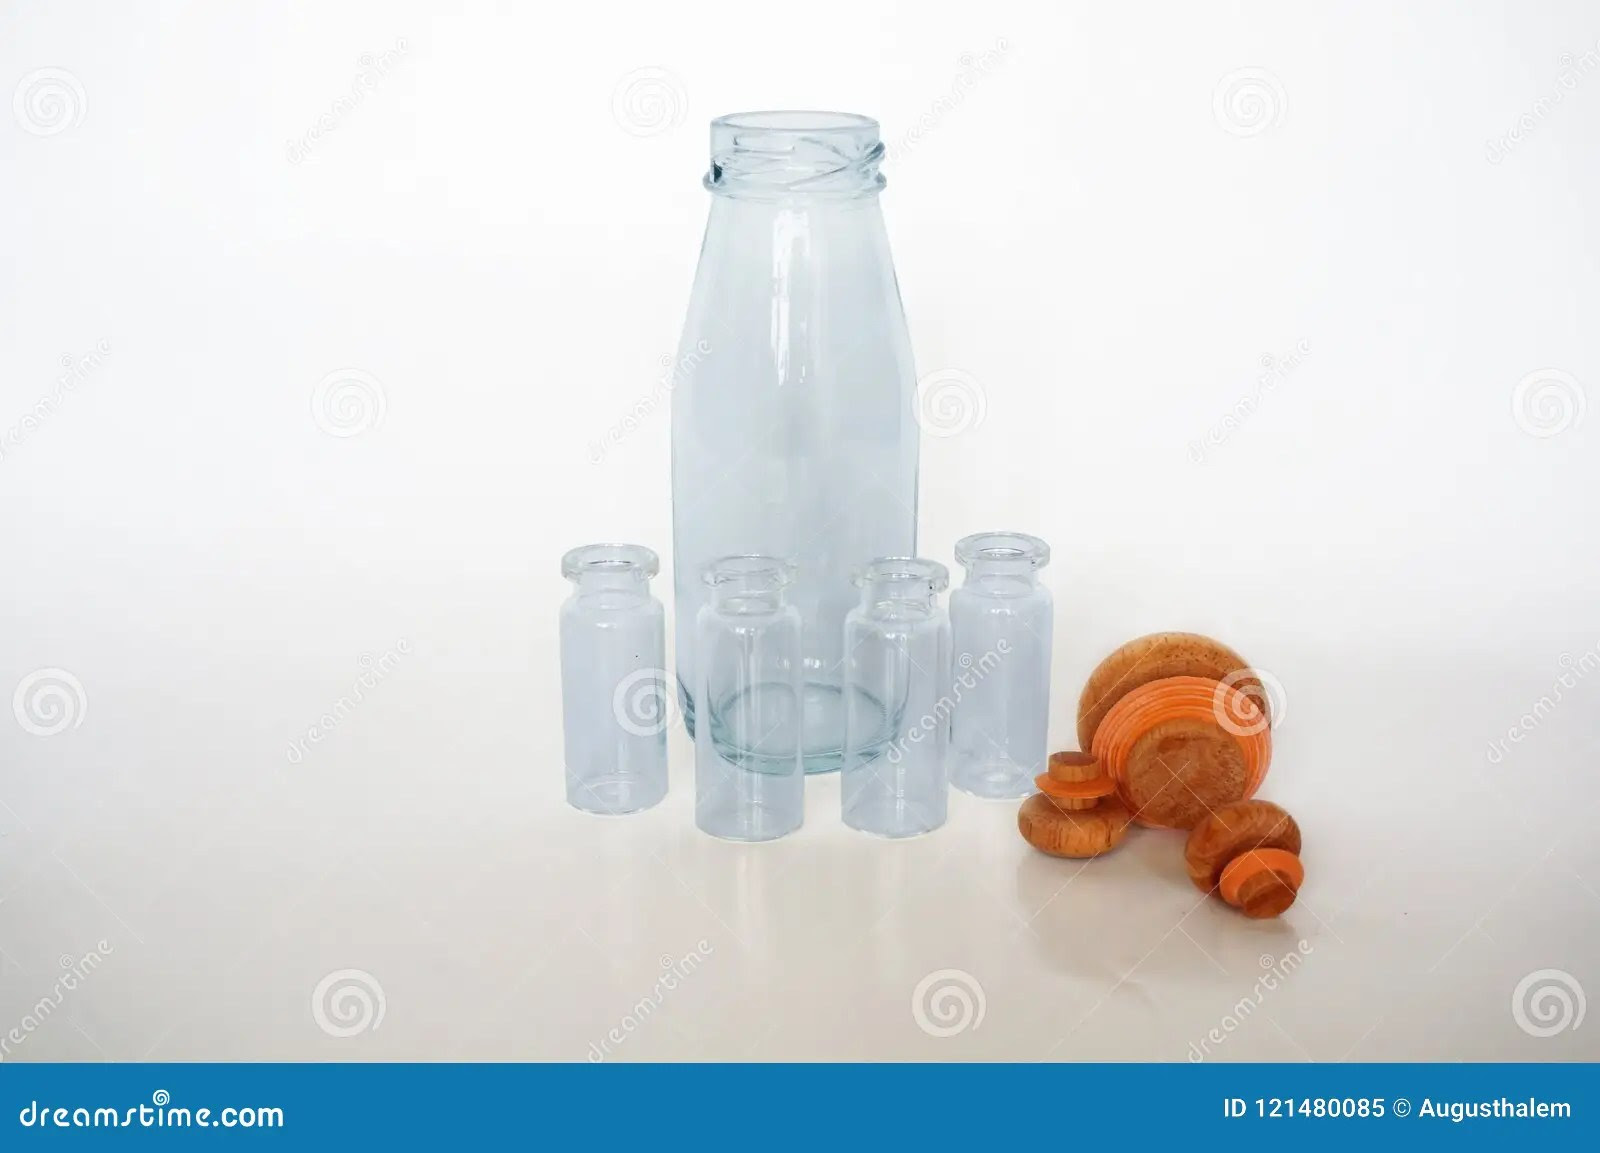 Closeup Of Empty Blue Glass Bottles Stock Image Image of isolate